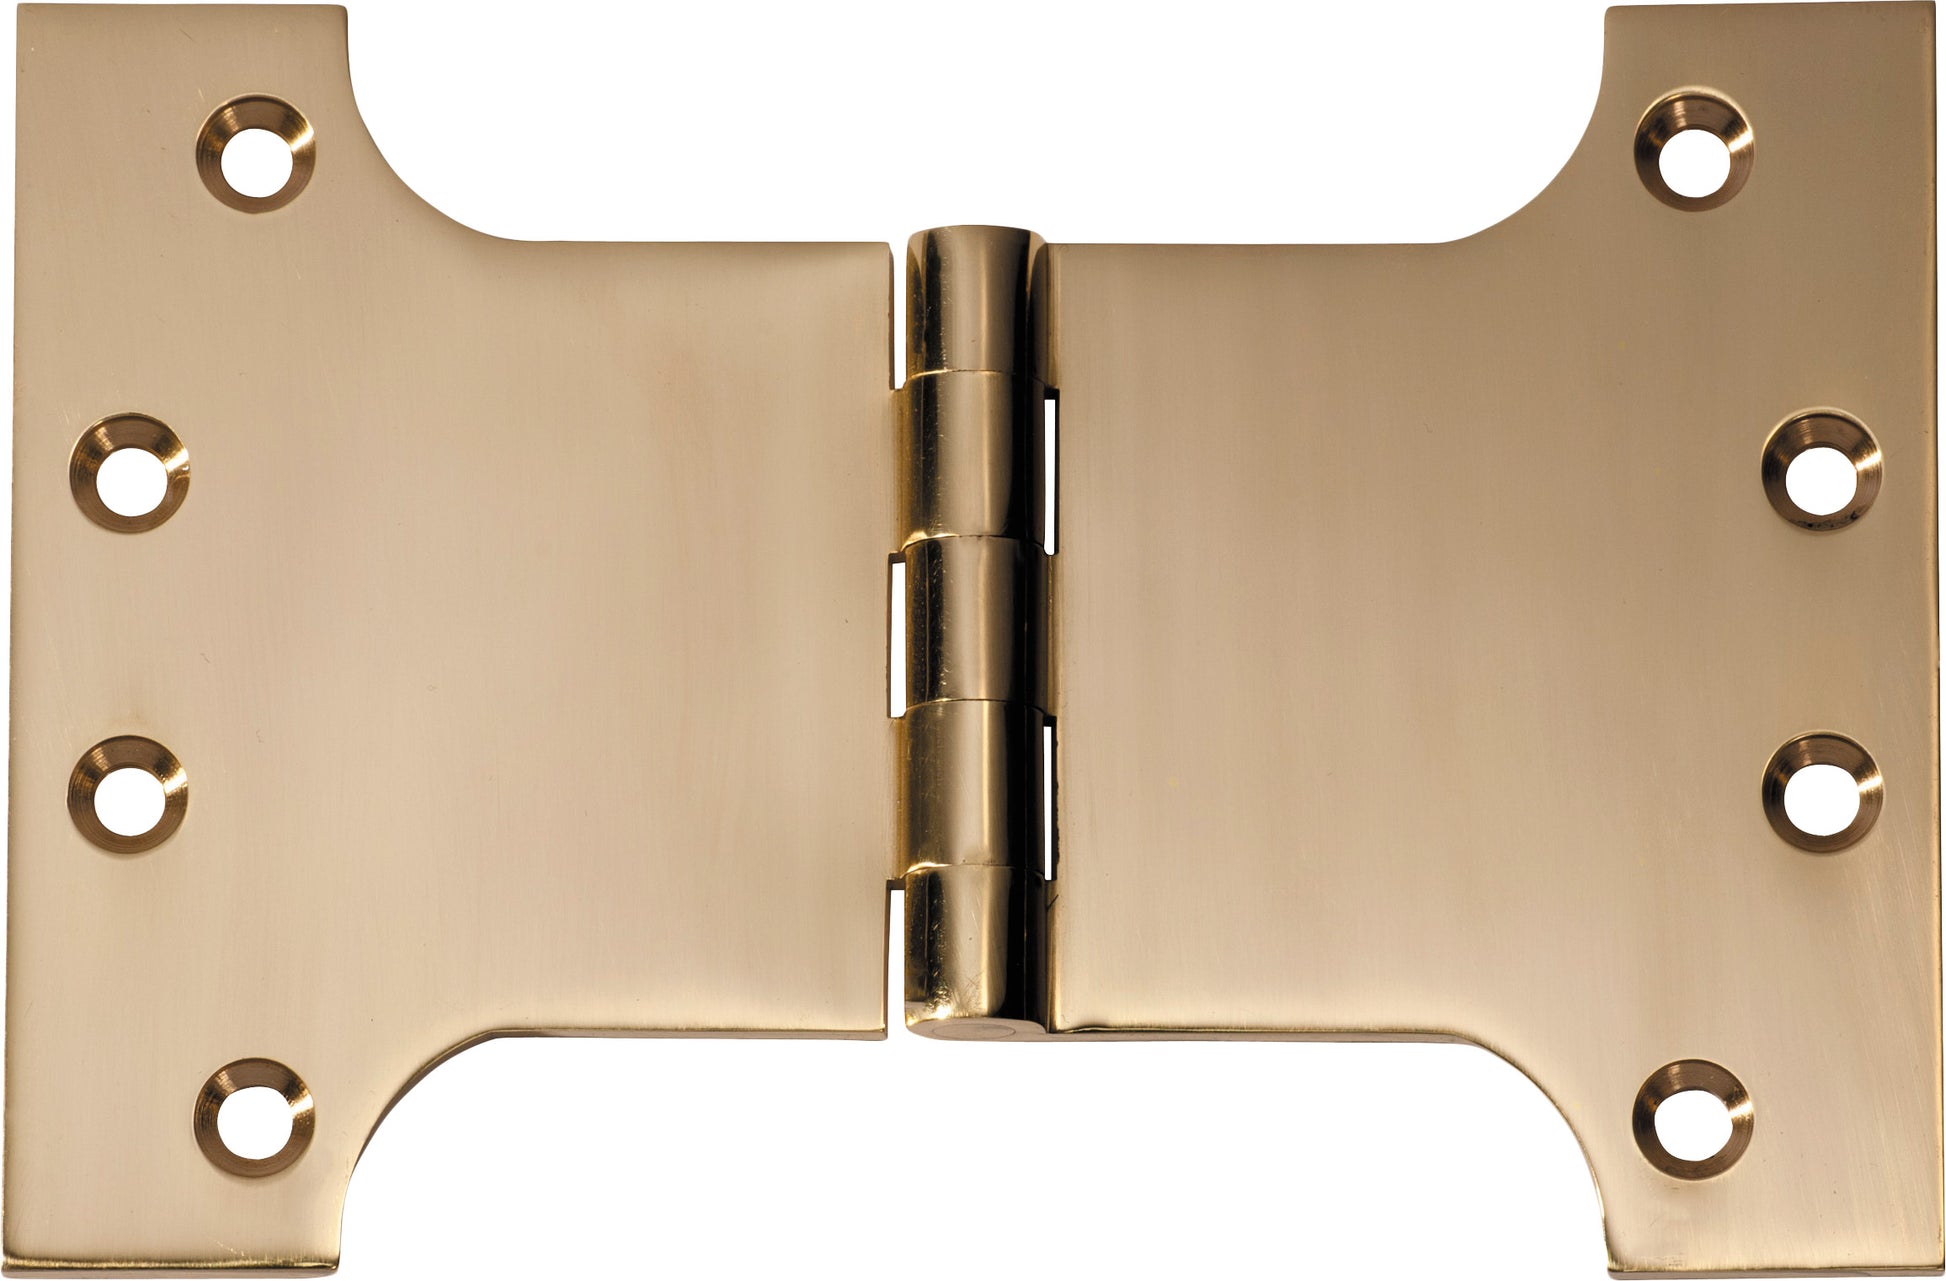 Tradco Shutter Parliament Hinge Polished Brass H100xW150xT4mm in Polished Brass